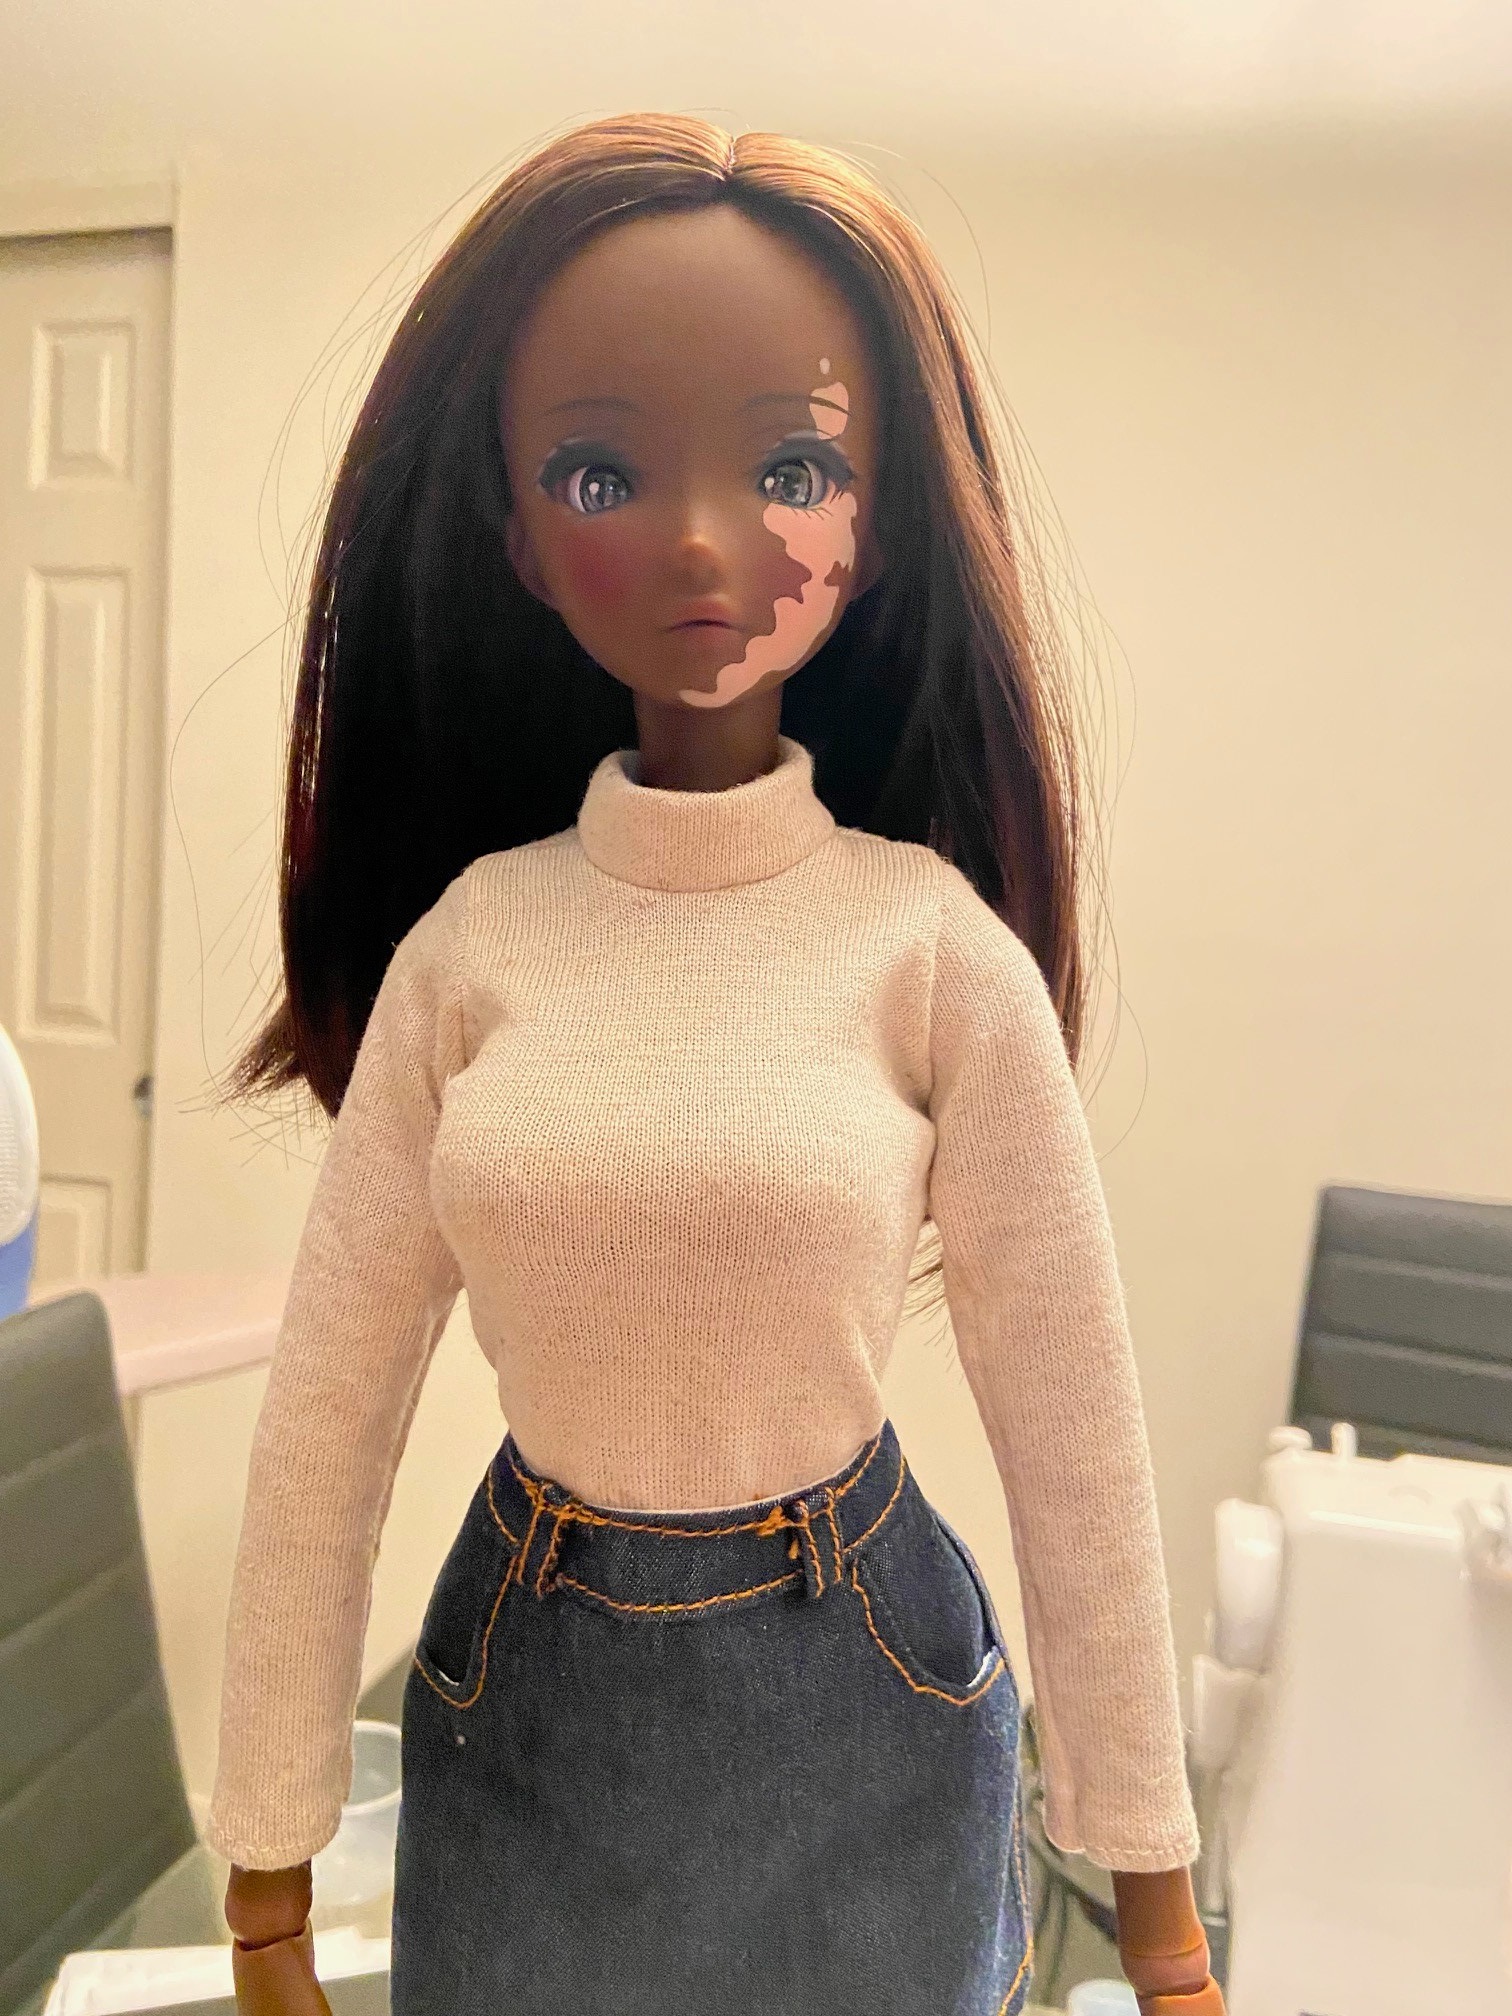 A Smart Doll Liberty in a white sweater.